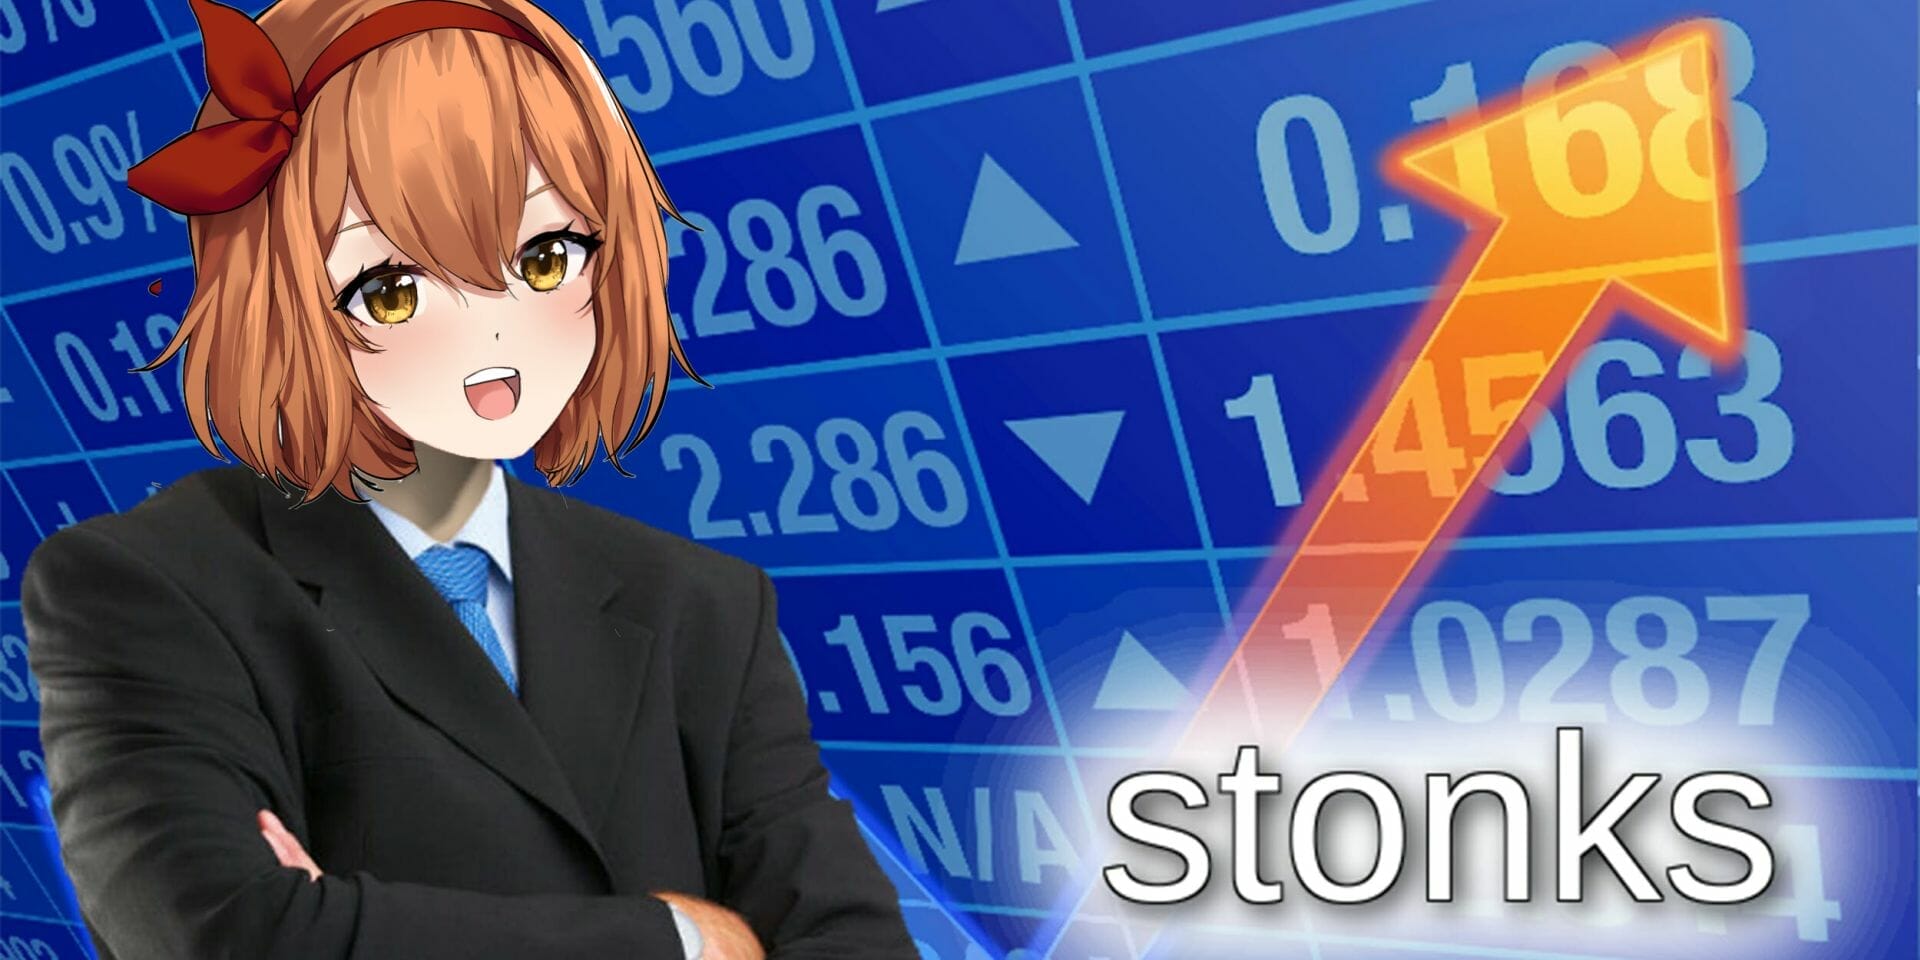 Image of a person in a suit standing in front of a series of numbers, who has a red-haired anime girl's head pasted over his. An orange line and the word "stonks" is to the character's right.